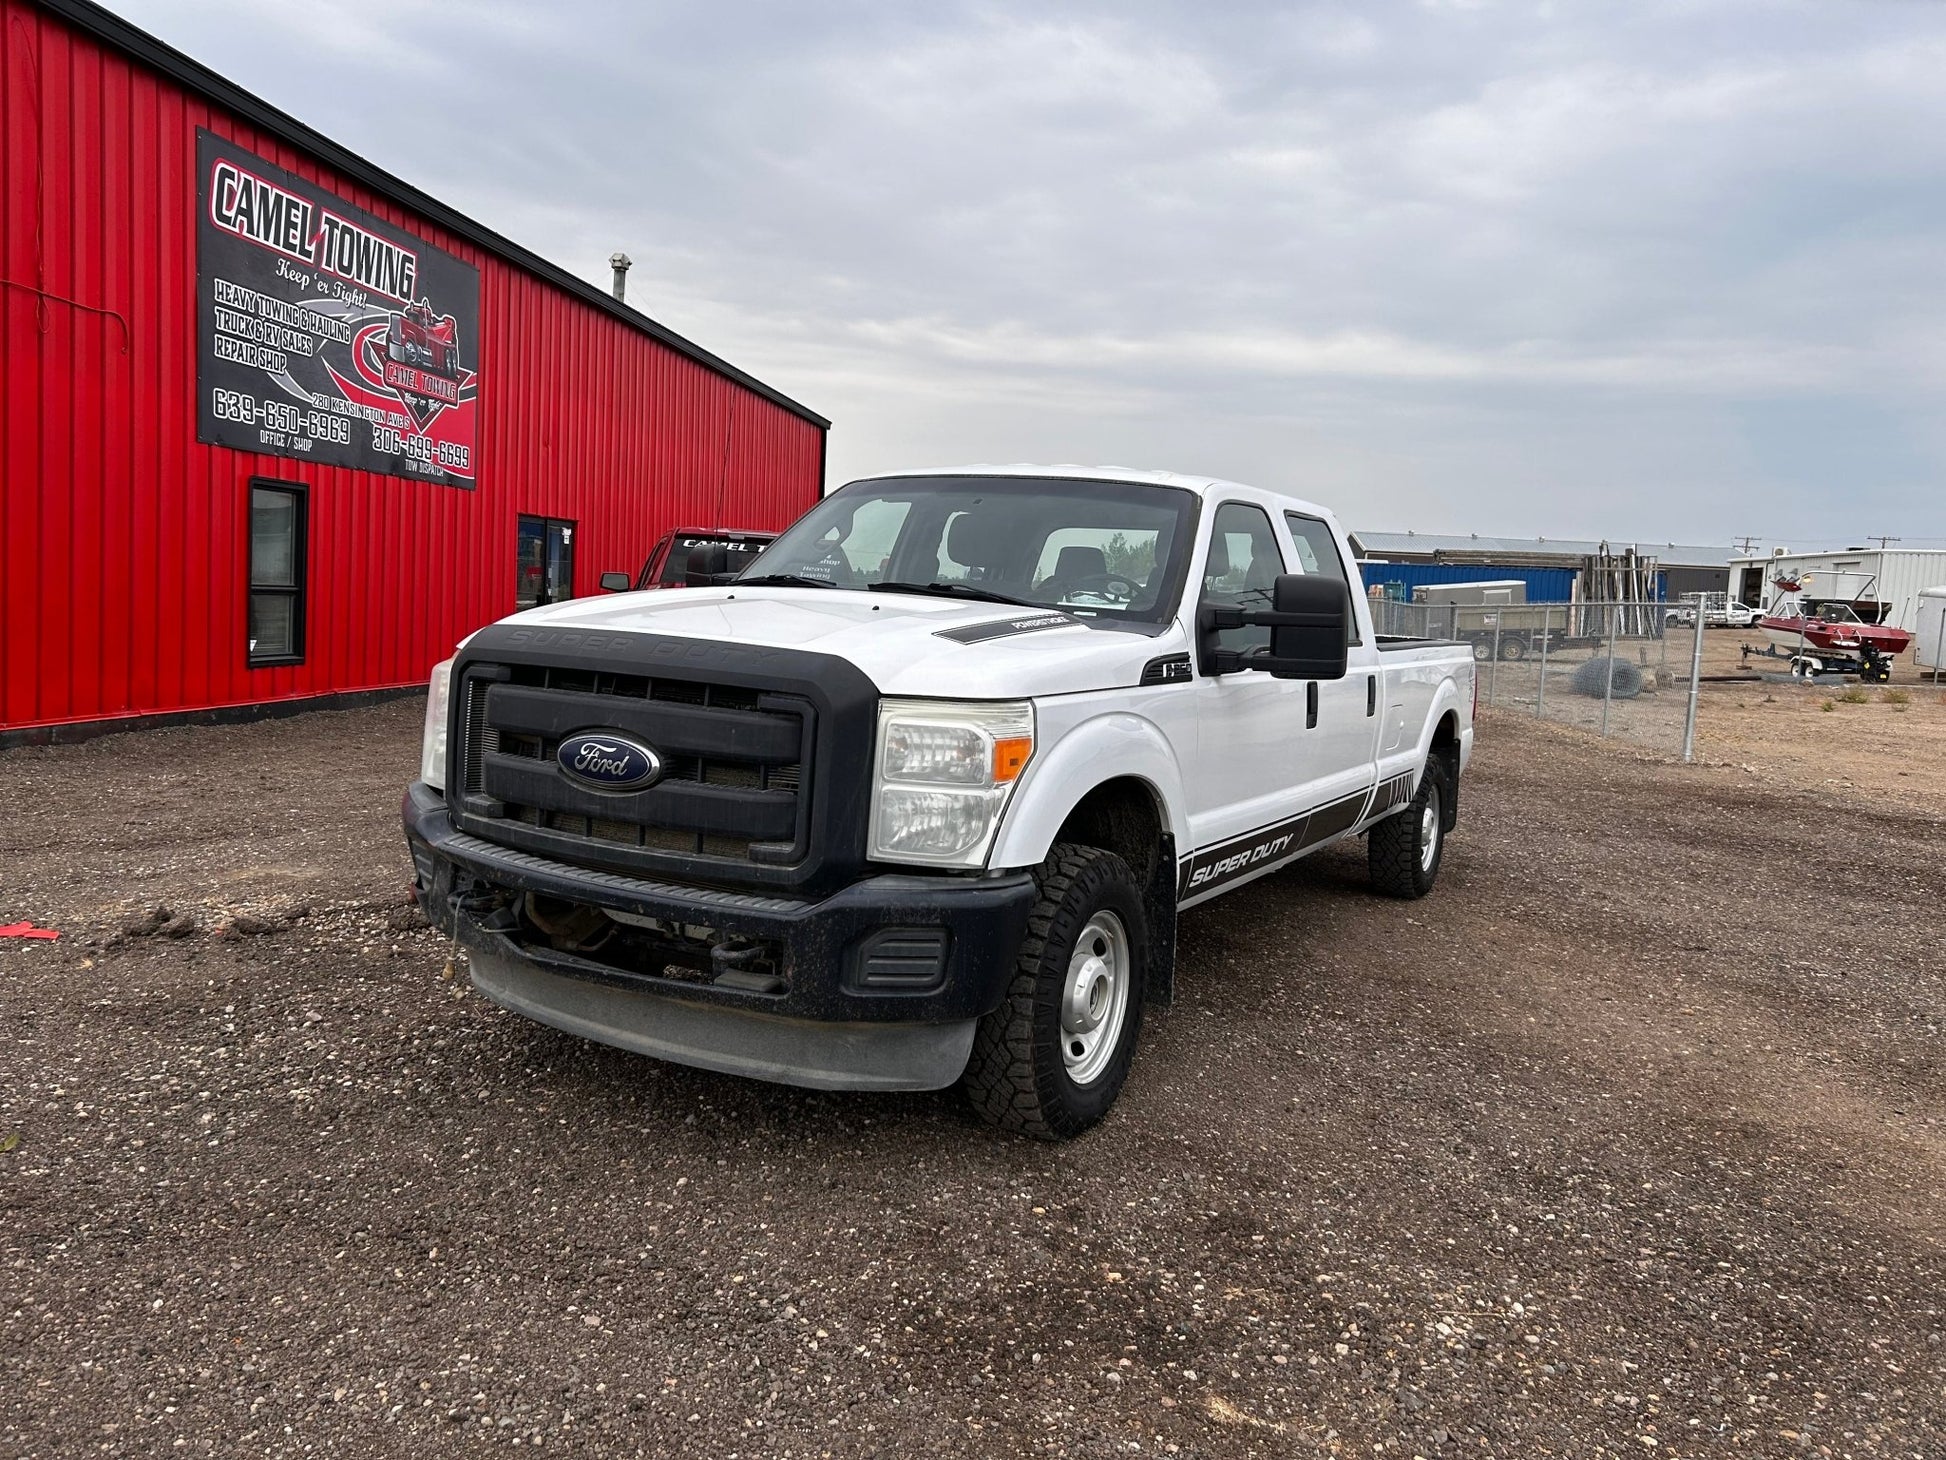 2012 Ford F250 6.7 Powerstroke 4x4 - Camel Towing and Sales